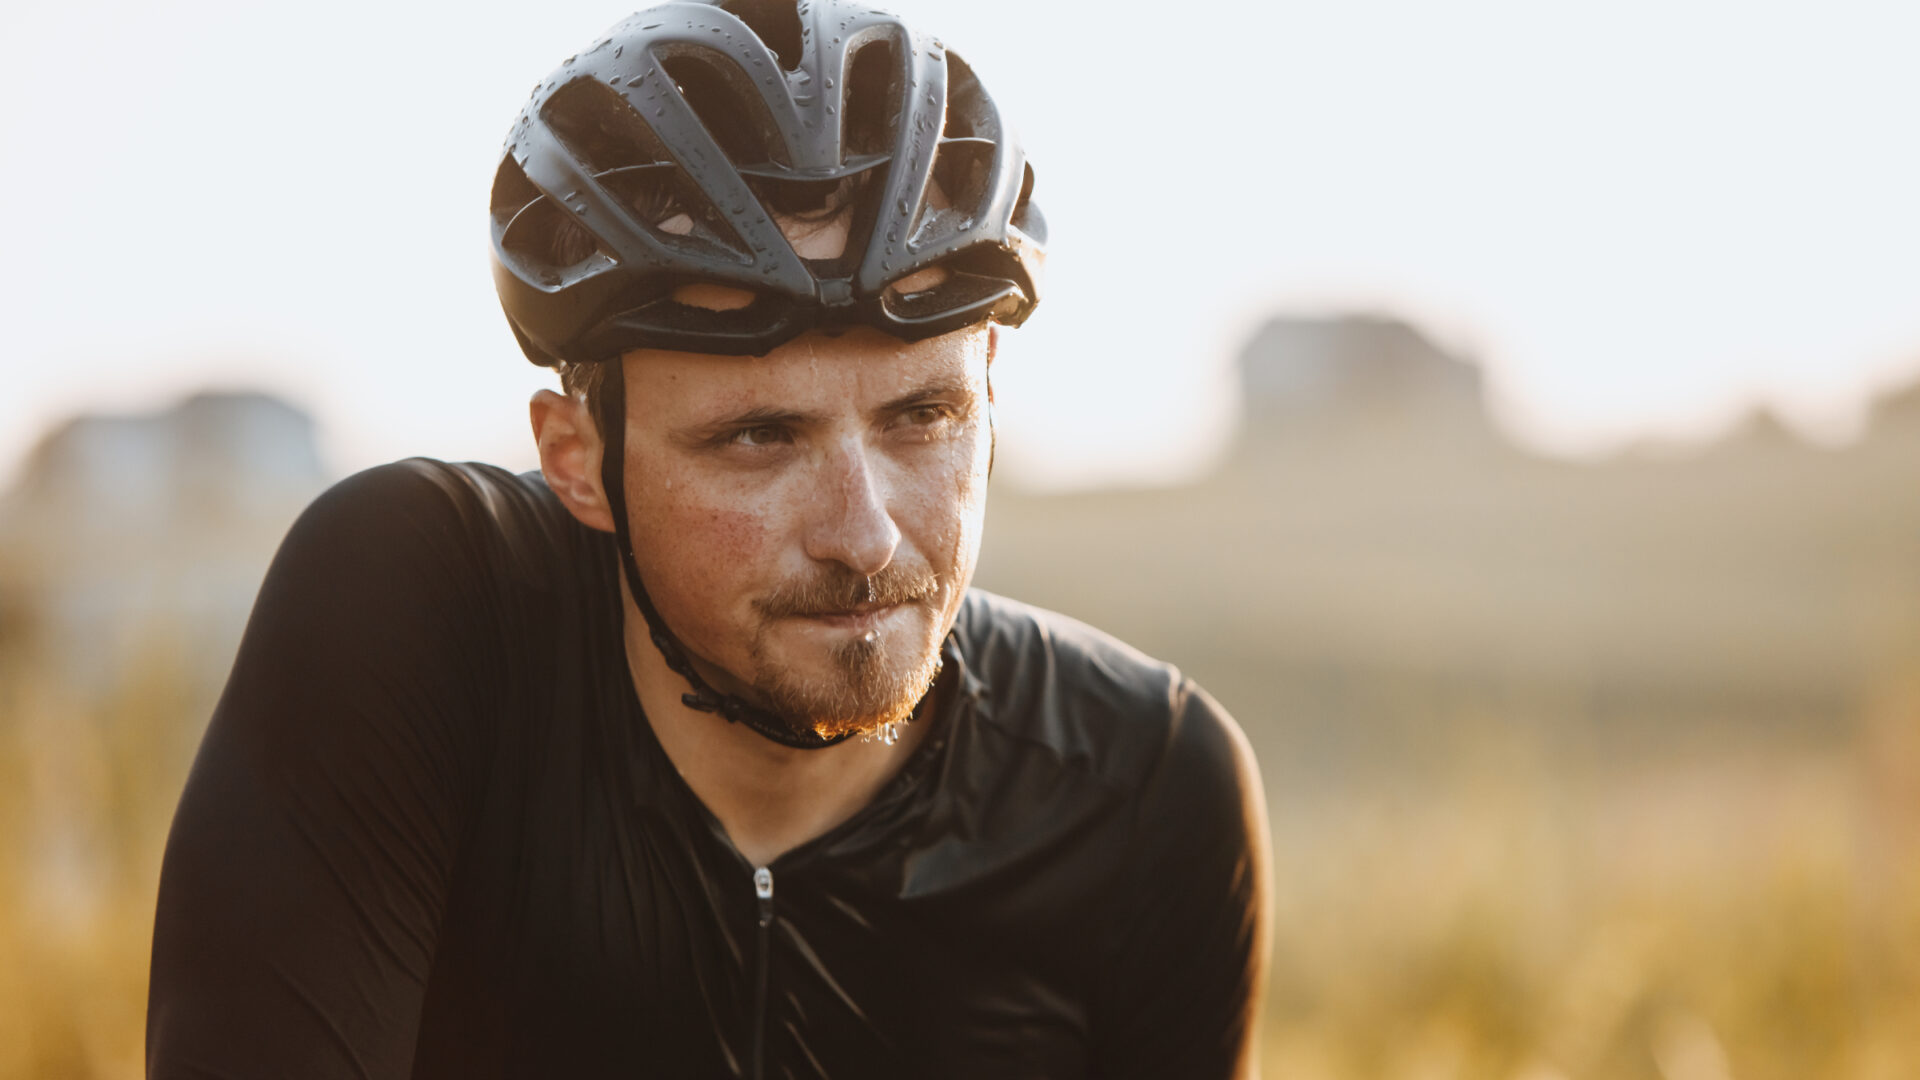 A cyclist pauses in the discomfort of a hot ride to drench himself in water